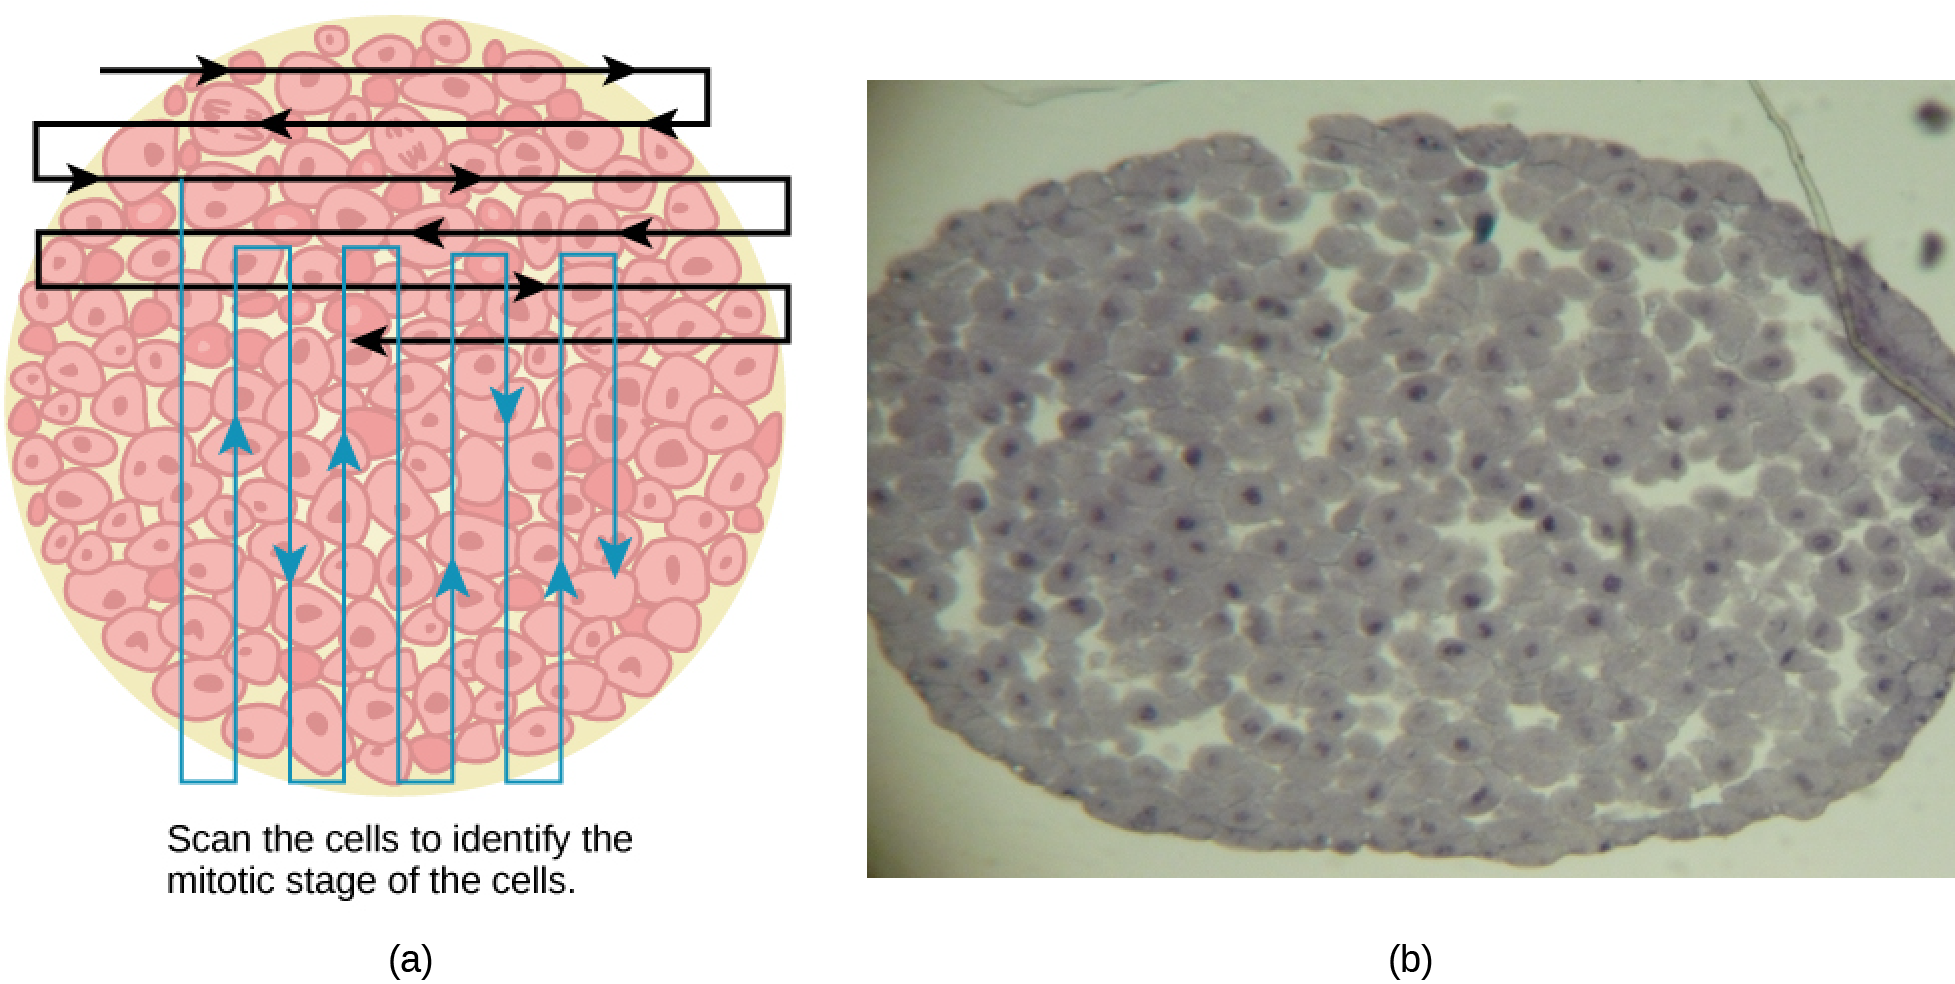 Left: This figure shows an illustration of whitefish blastula cells with a scanning pattern from right to left, and from top to bottom. Right: A micrograph of whitefish blastula cells in various phases of the cell cycle is shown.